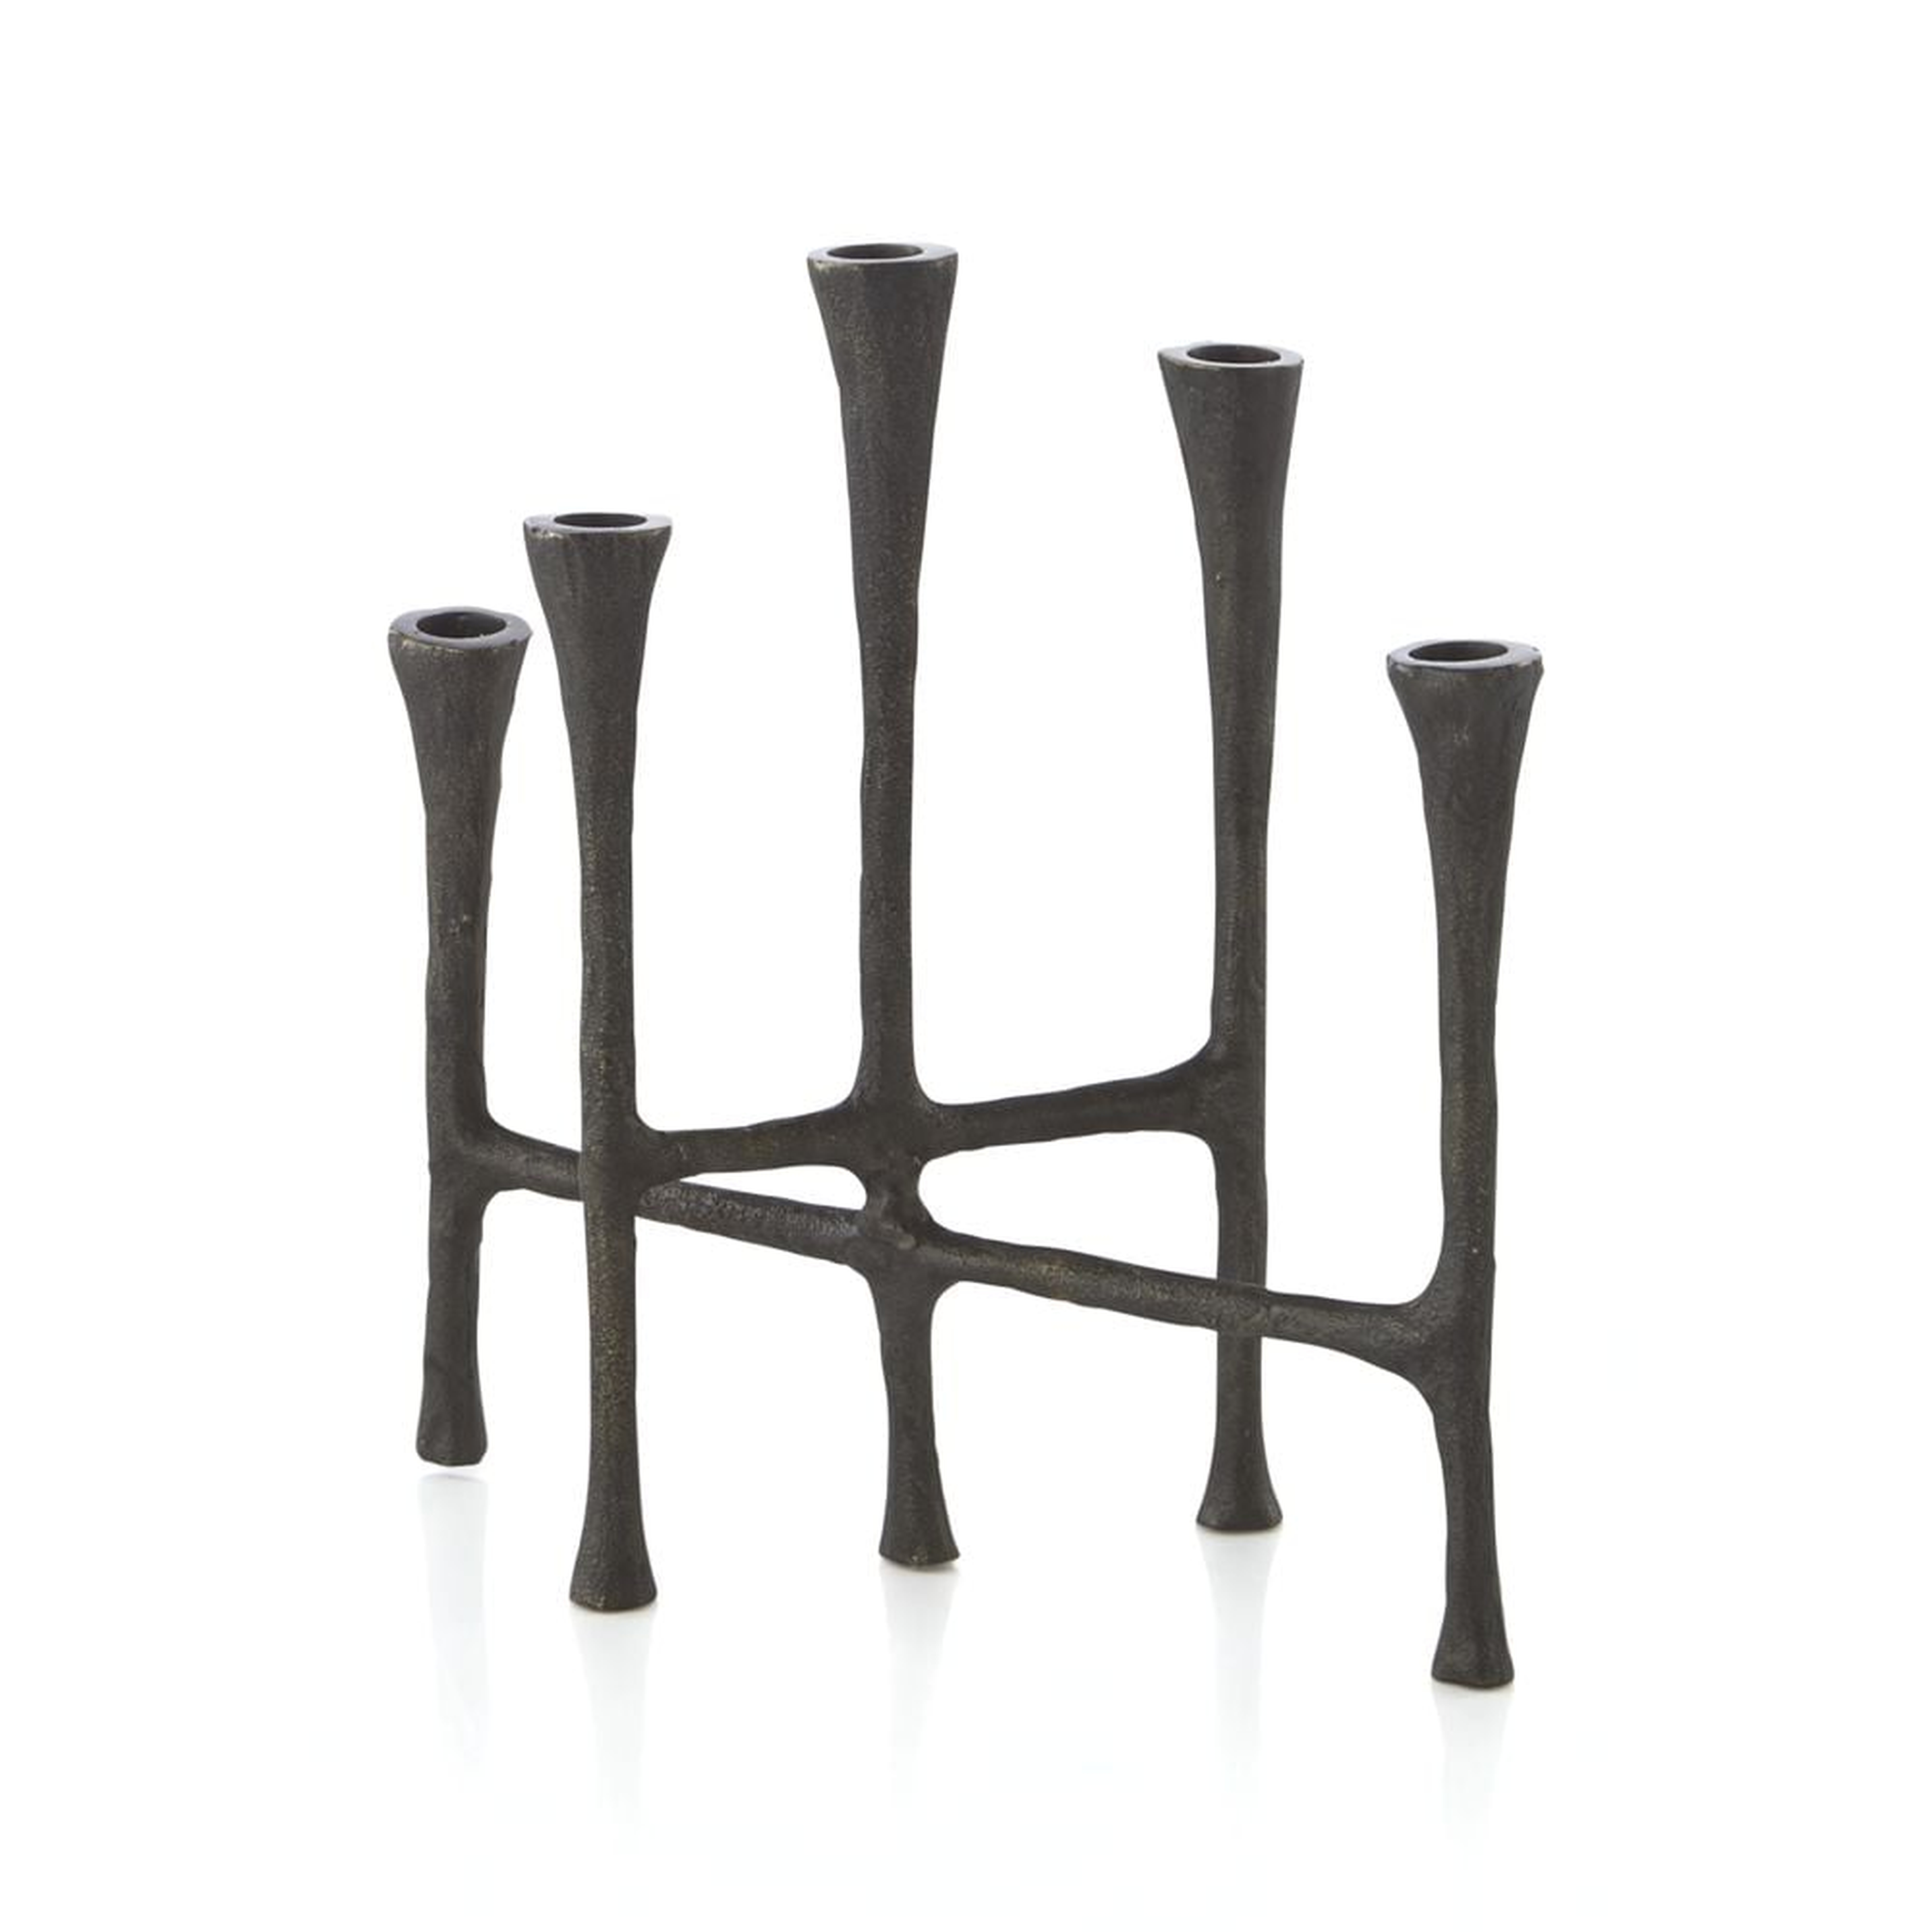 Rustic Bronze Metal Centerpiece Taper Candle Holder - Crate and Barrel